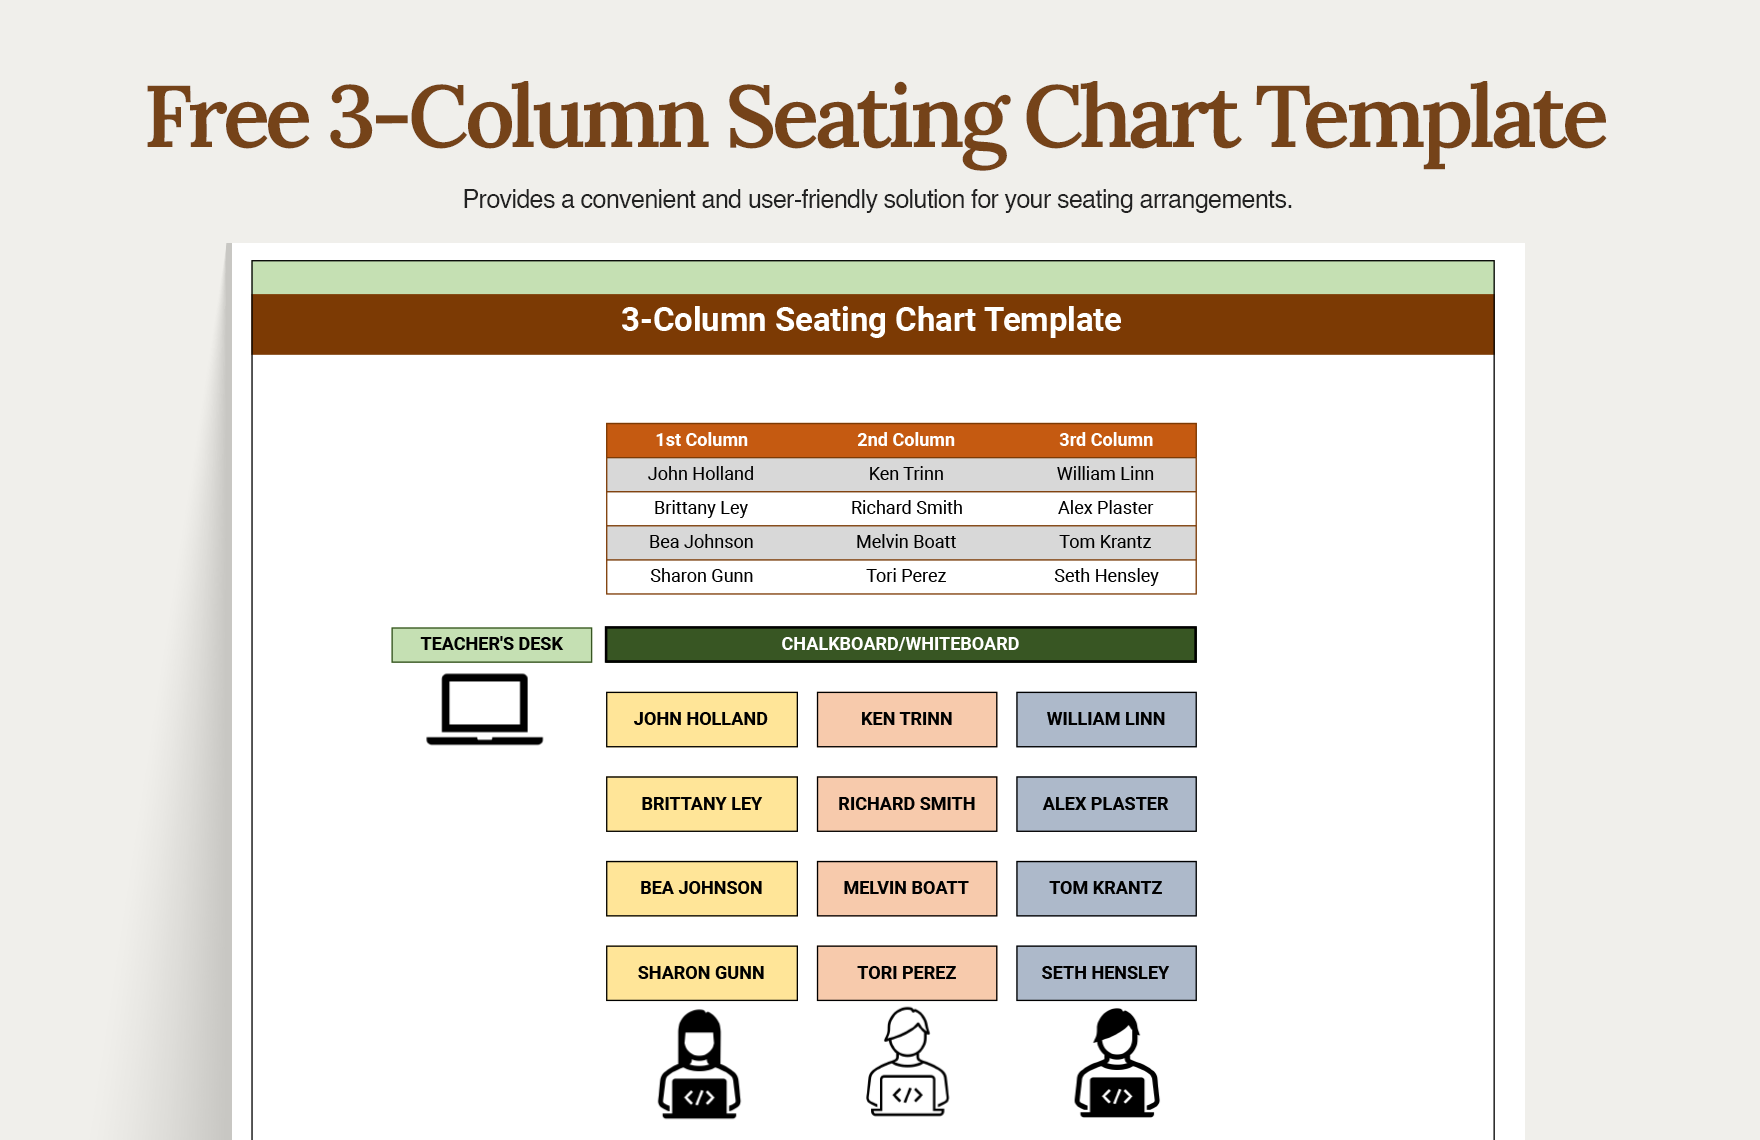 Free 3-Column Seating Chart Template